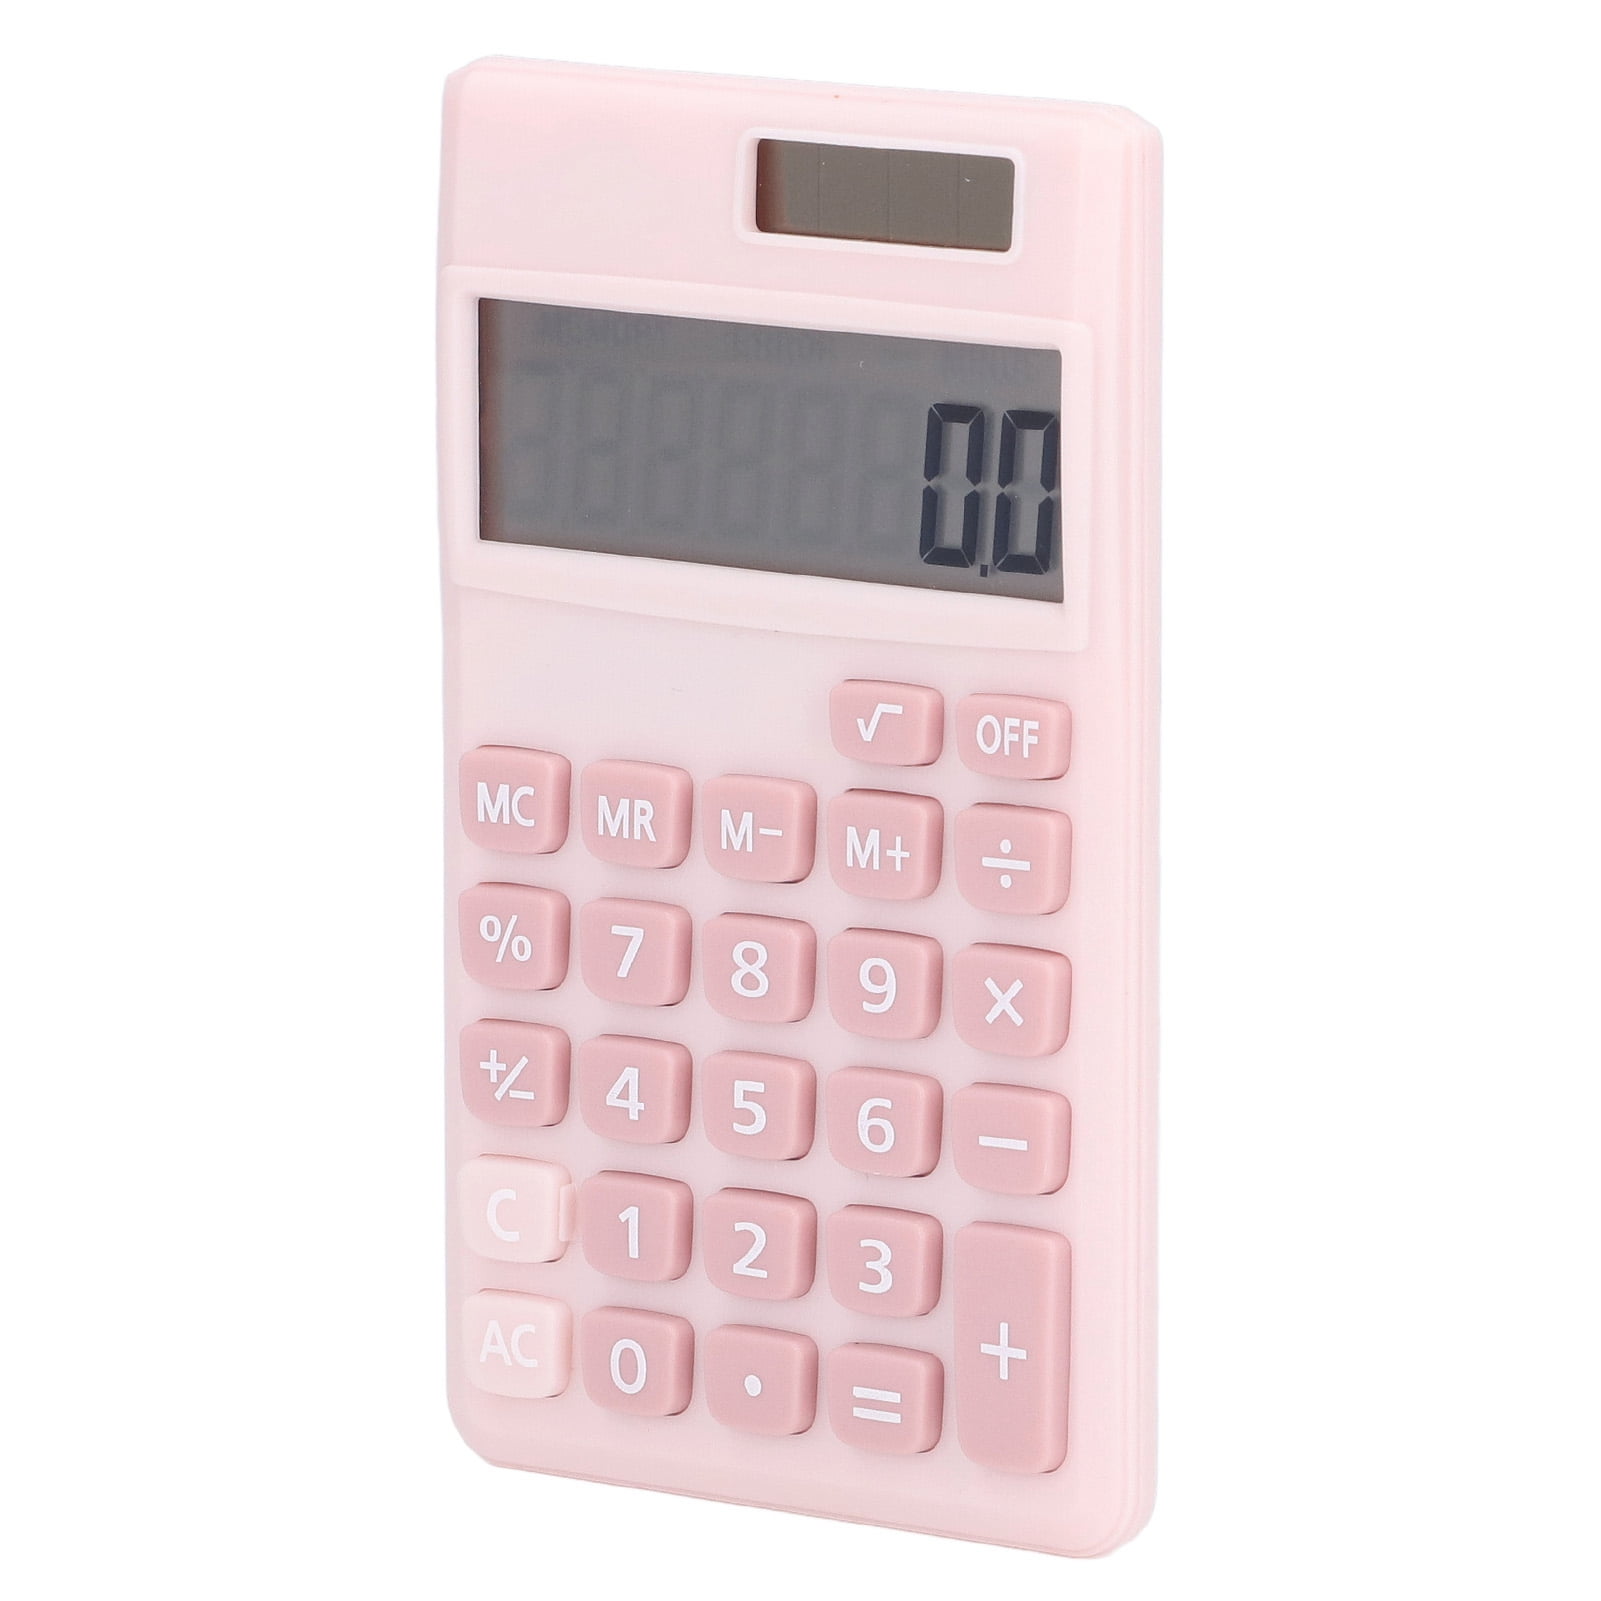 Casio HS-10 Handheld Pocket Electronic Calculator s - Solar Power 8 Character 